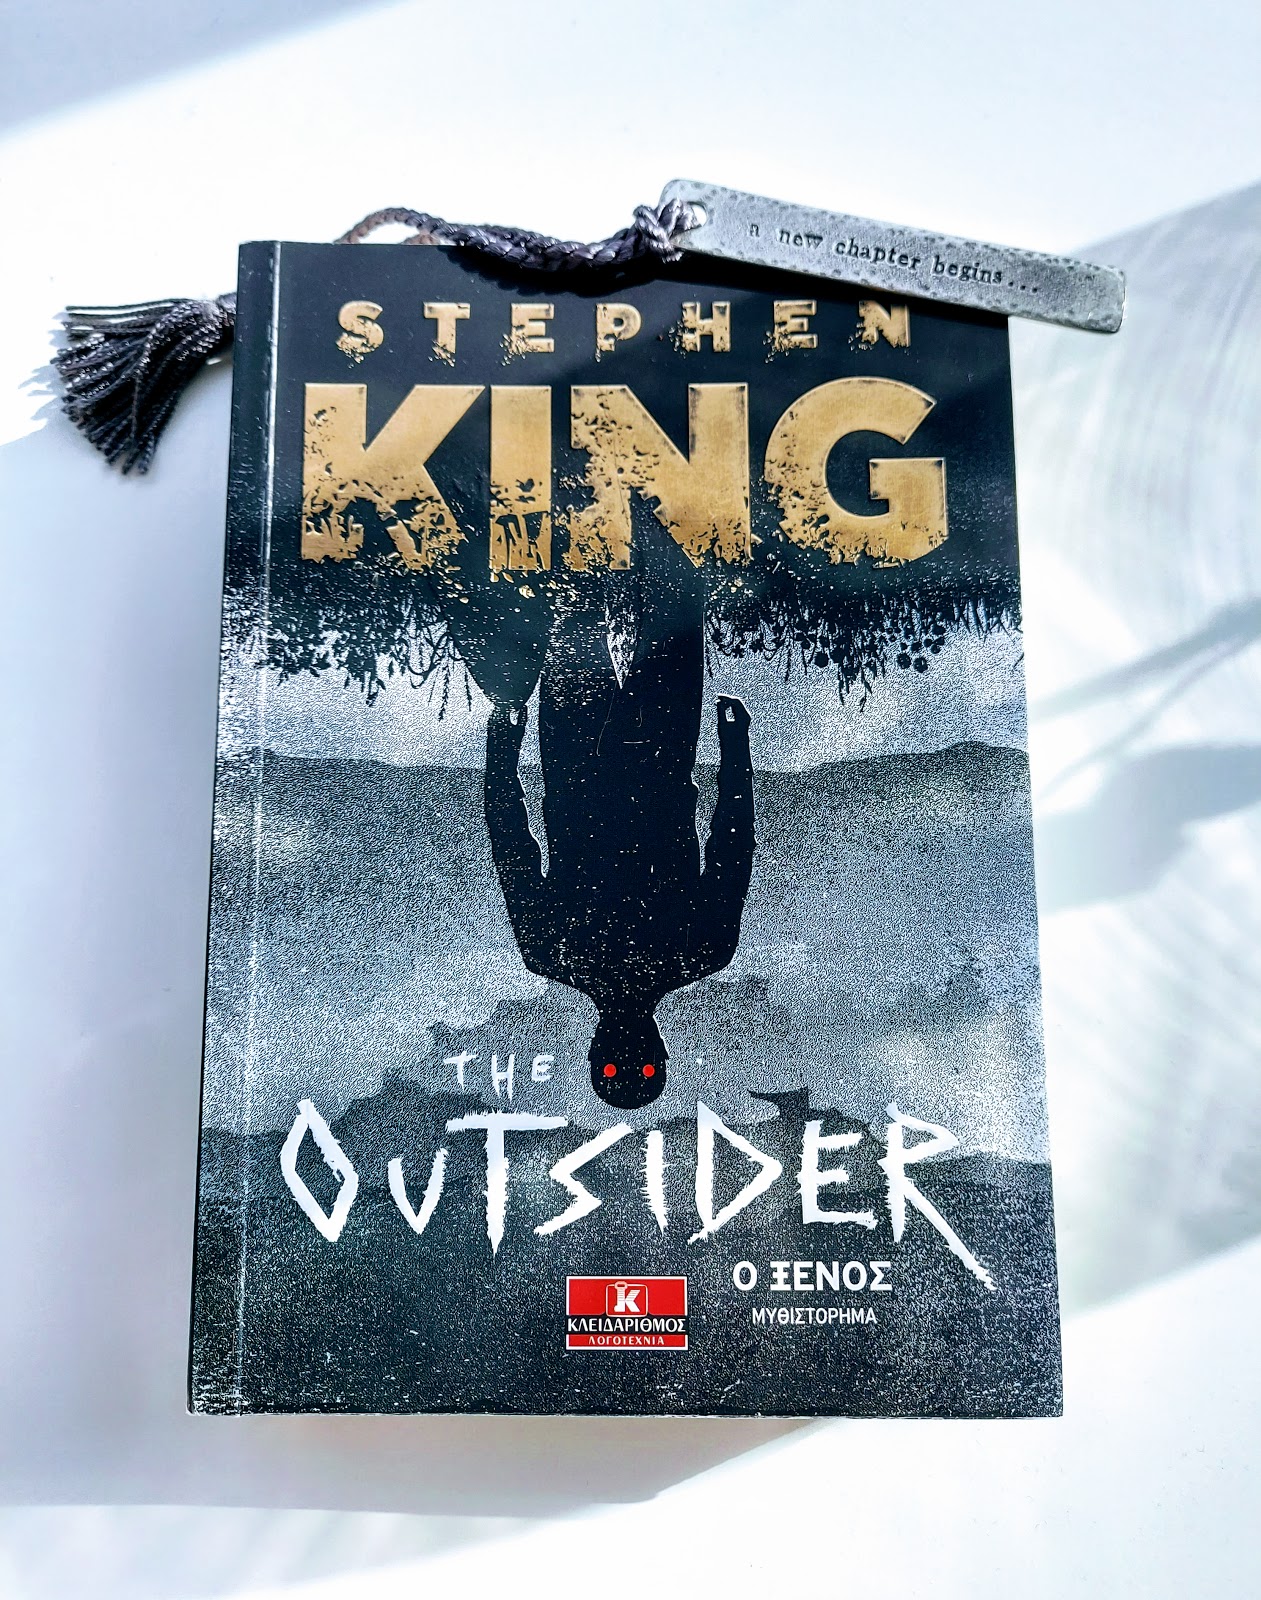  The Outsider Stephen King Drawings Sketch for Adult